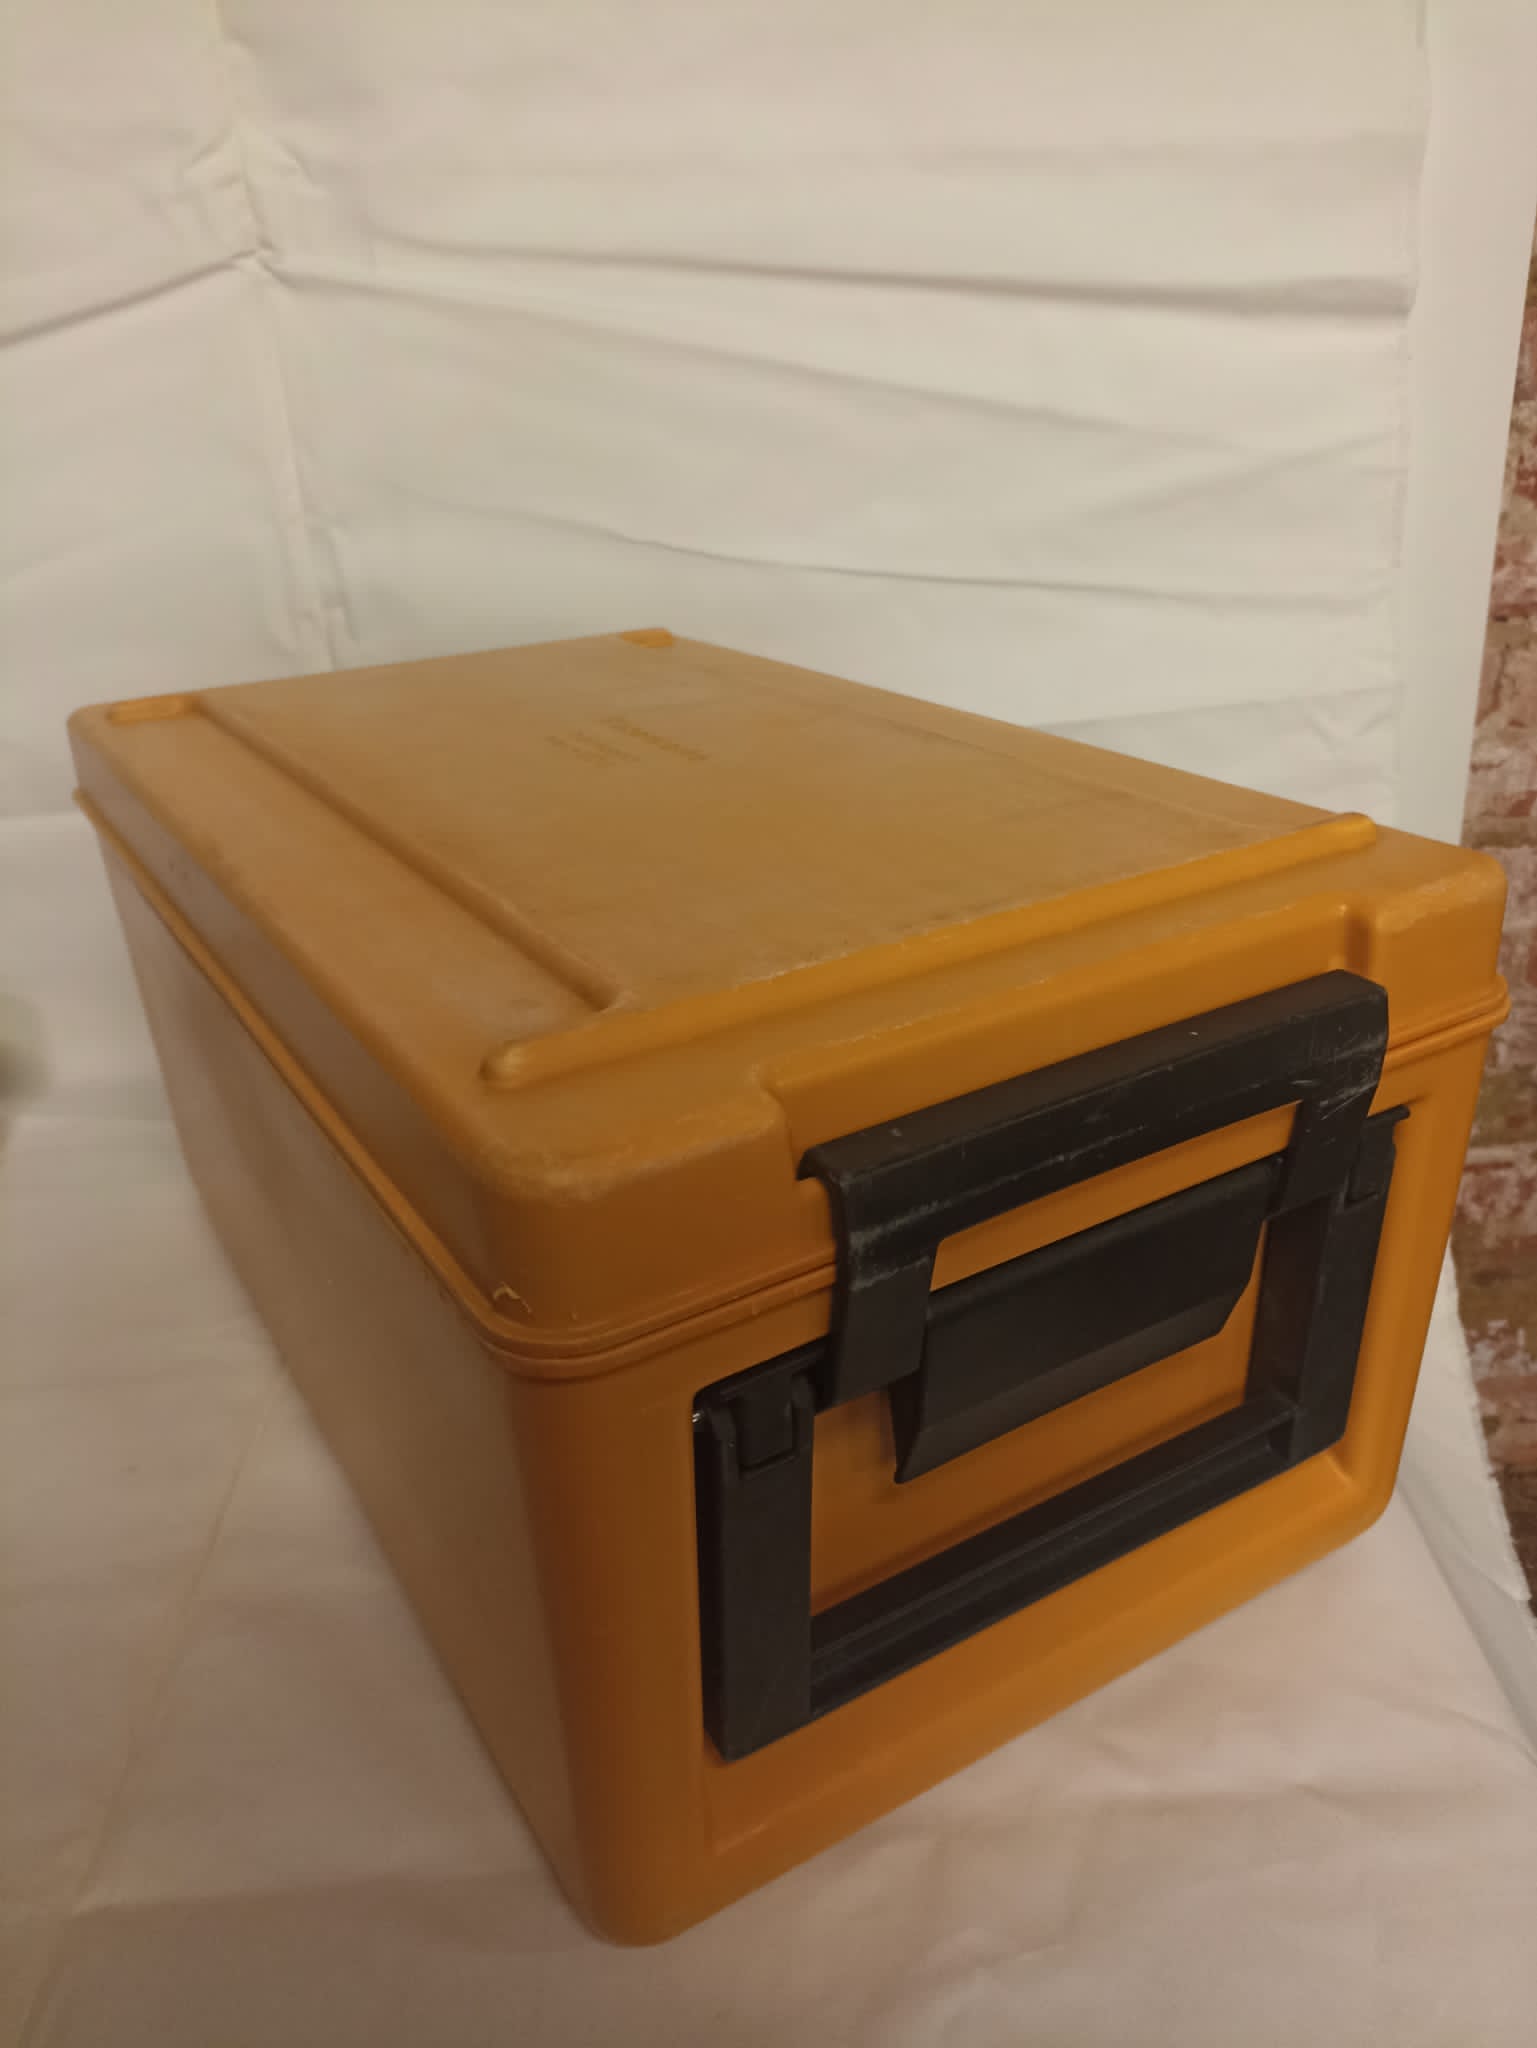 Thermobox / Thermoport